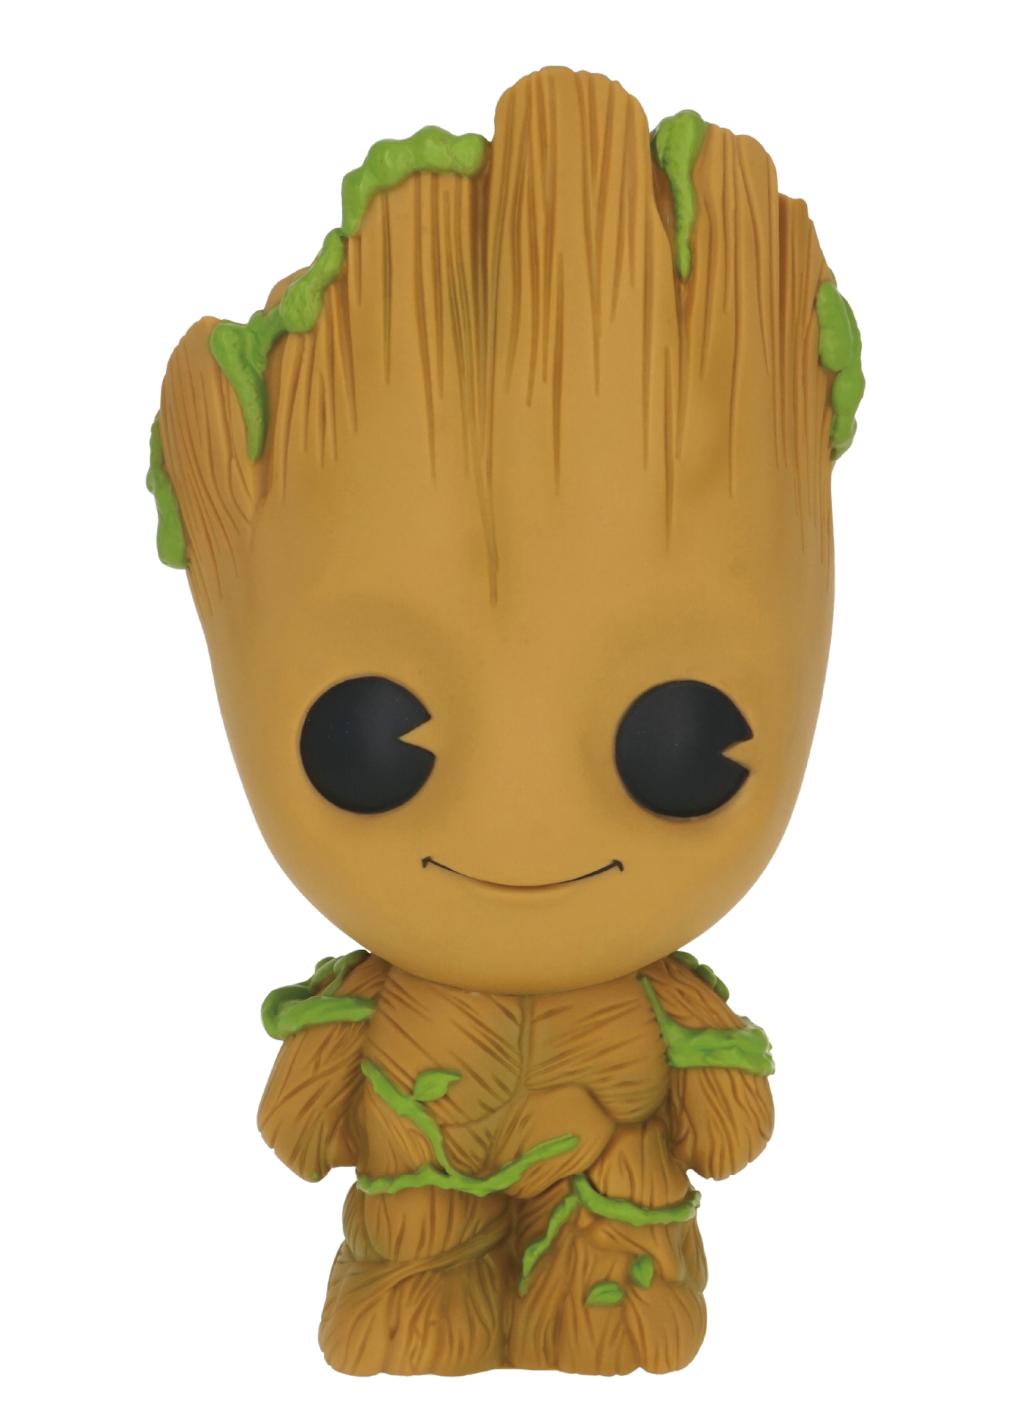 GUARDIANS OF THE GALAXY - Figural Bank - Groot 20cm